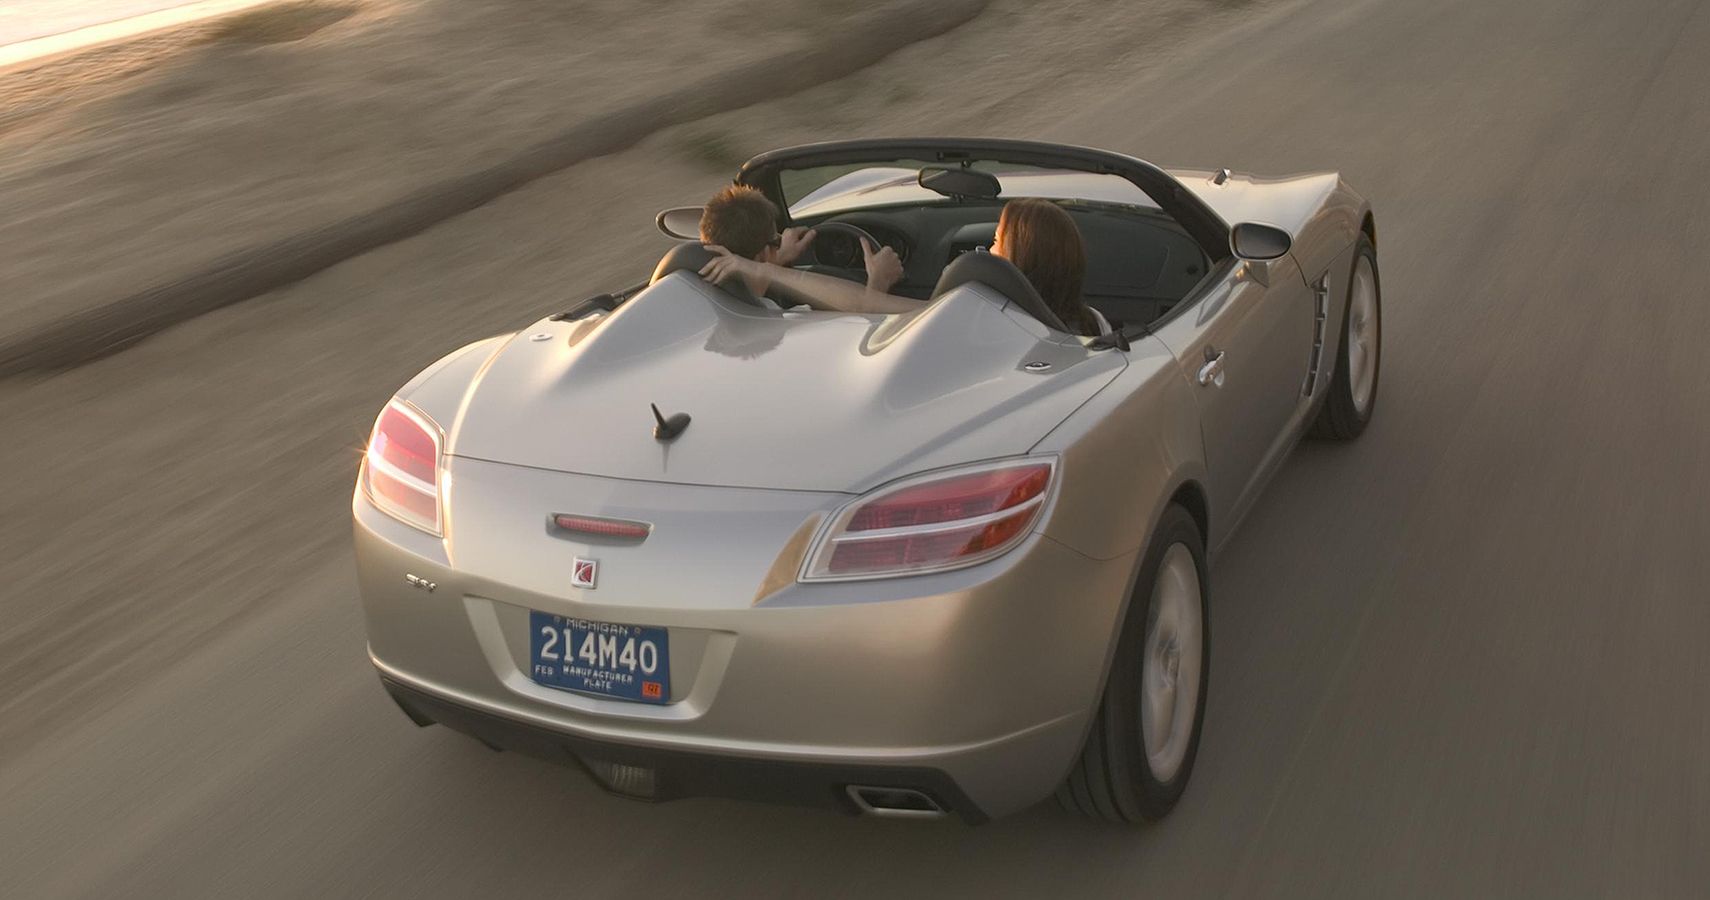 Saturn Sky: Another Defunct GM marque